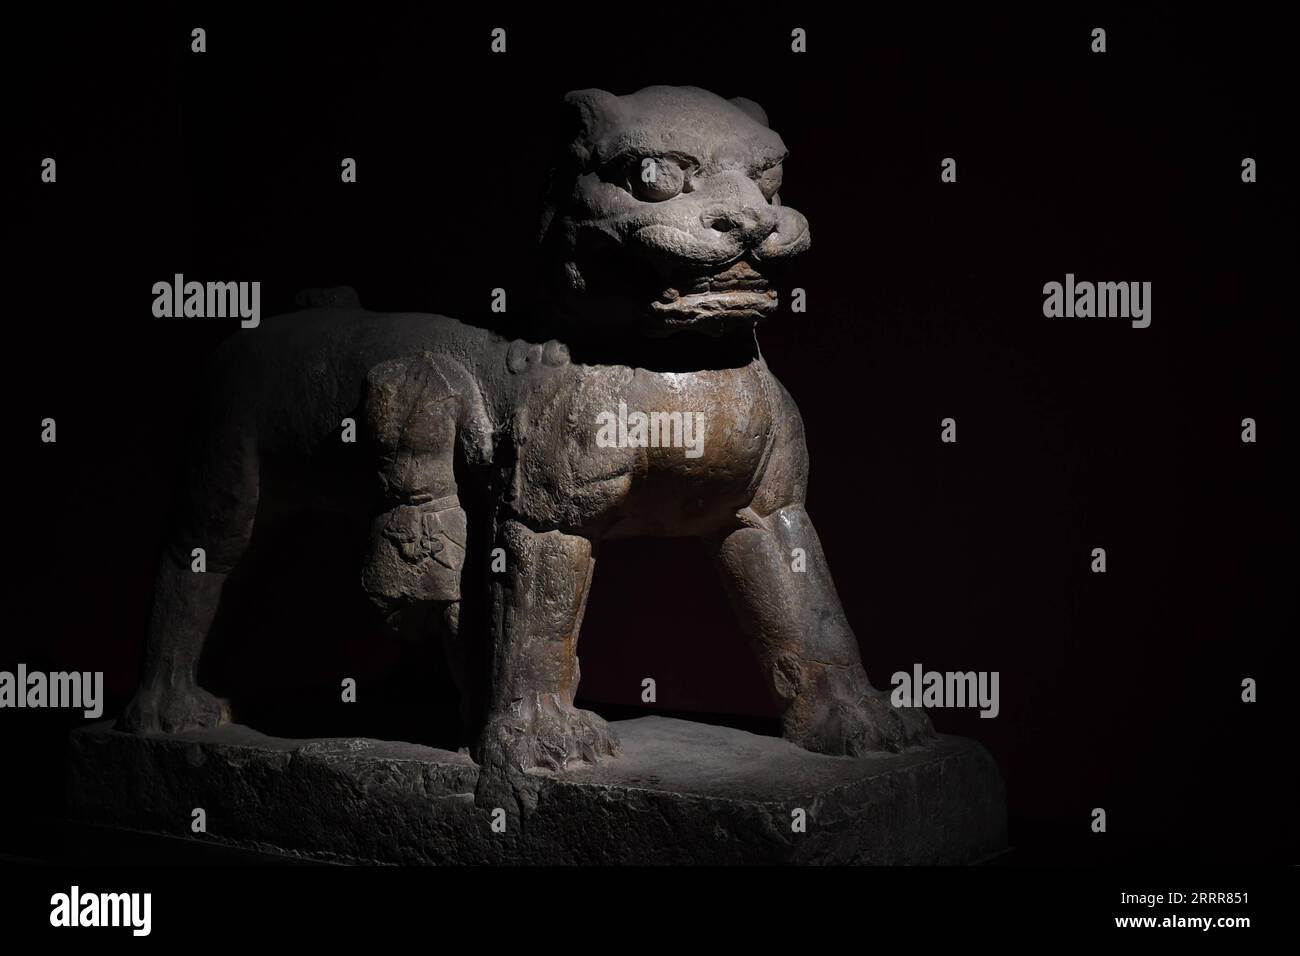 230513 -- XI AN, May 13, 2023 -- This photo taken on May 9, 2023 shows a stone lion statue displayed in Xi an Beilin Museum in Xi an, northwest China s Shaanxi Province. Founded about 3,100 years ago, Xi an, which is today the capital of China s Shaanxi Province, served as the capital for 13 dynasties in Chinese history. This is also the place where Zhang Qian, an envoy of the Western Han Dynasty 202 BC-25 AD, began his journey to the Western regions via Central Asia. This expedition eventually led to the opening of the Silk Road. Xi an has a total of 159 museums, attracting over 30 million pe Stock Photo